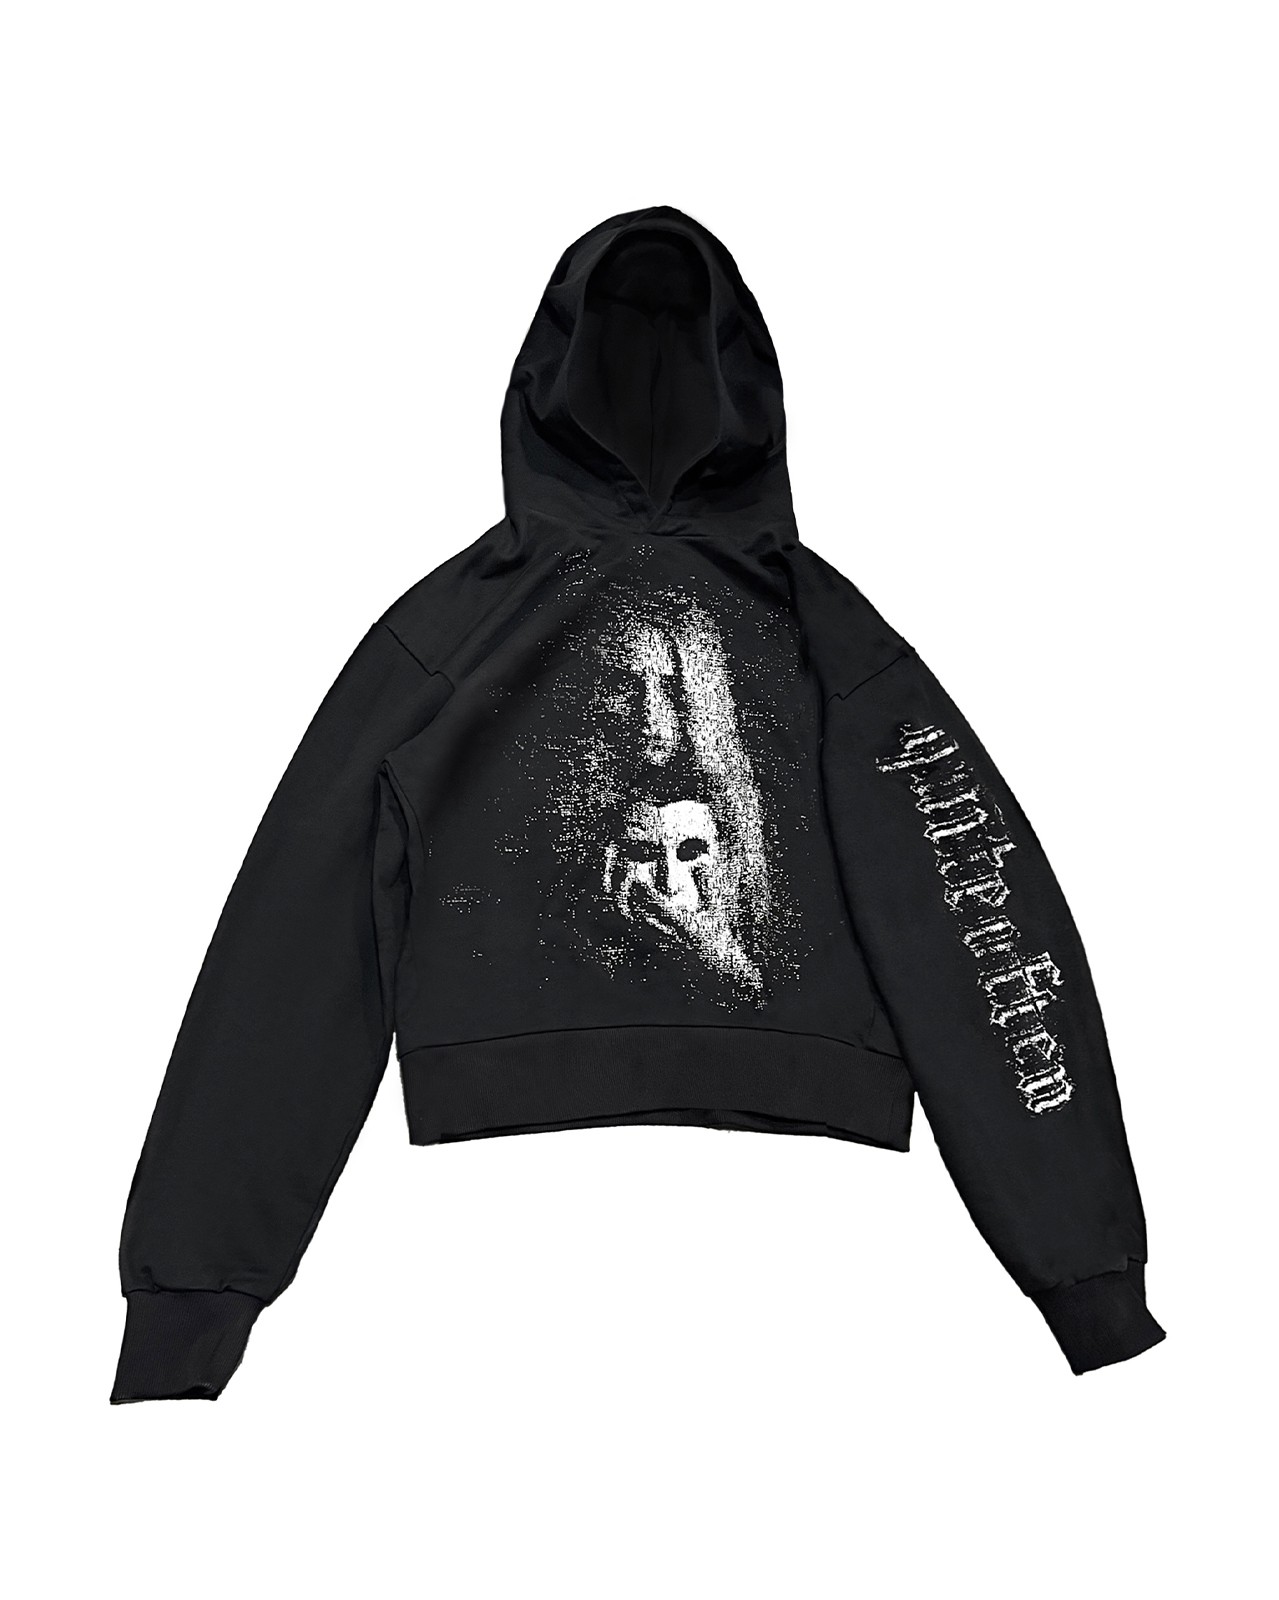 Wounded '' Girl '' Hoodie